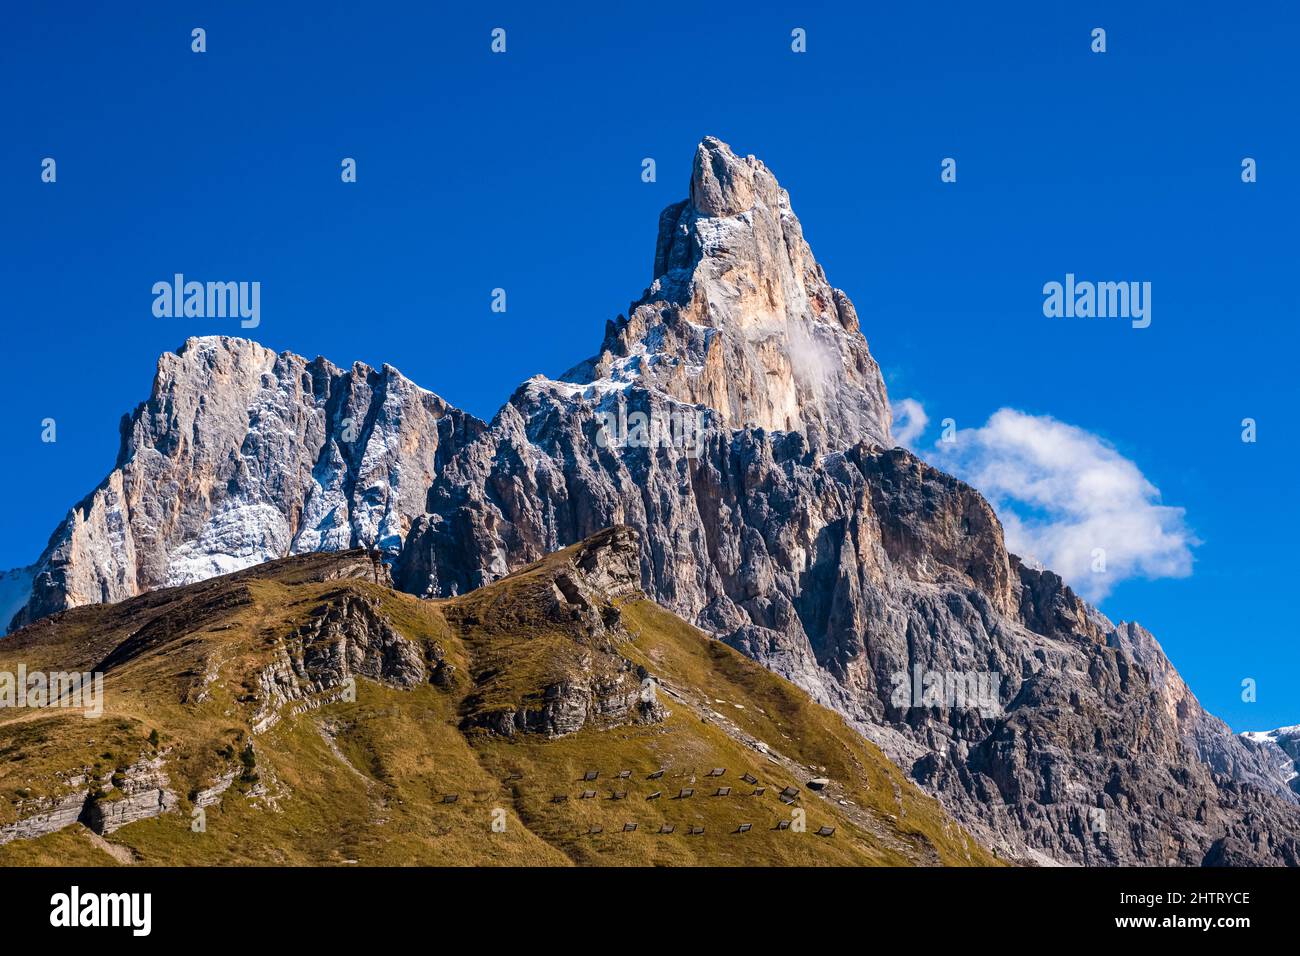 Cima di Vezzana (left) and Cimon della Pale (right), two of the main summits of the Pala group, seen from above Rolle Pass in autumn. Stock Photo